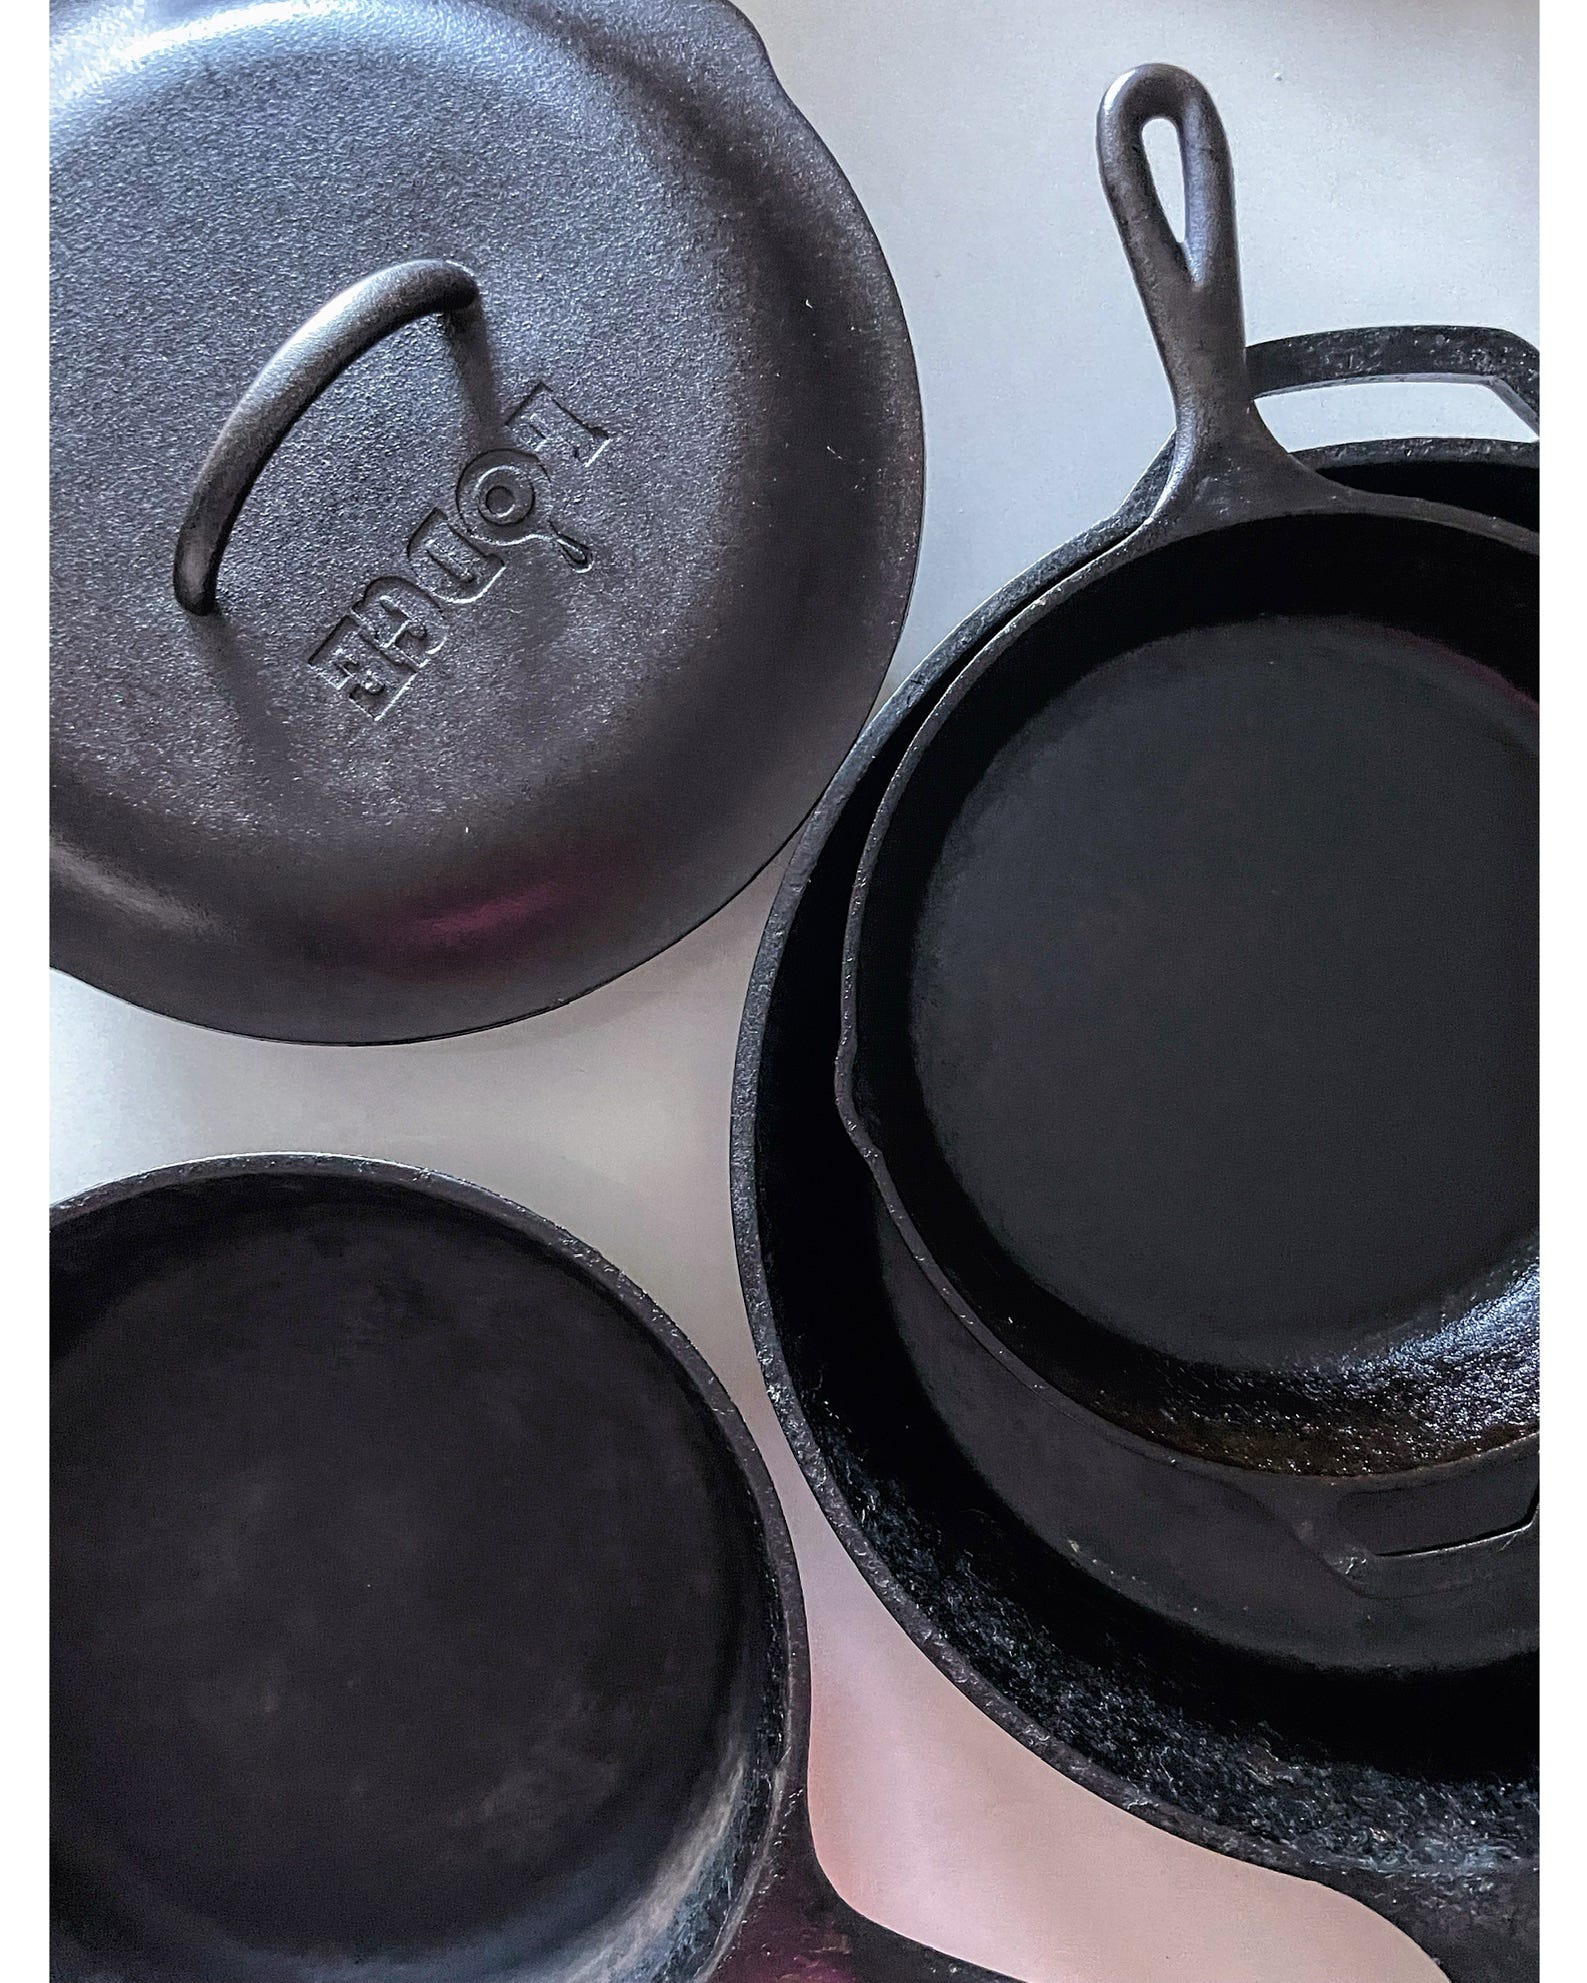 Anything's possible in a cast iron - by Deepa Shridhar